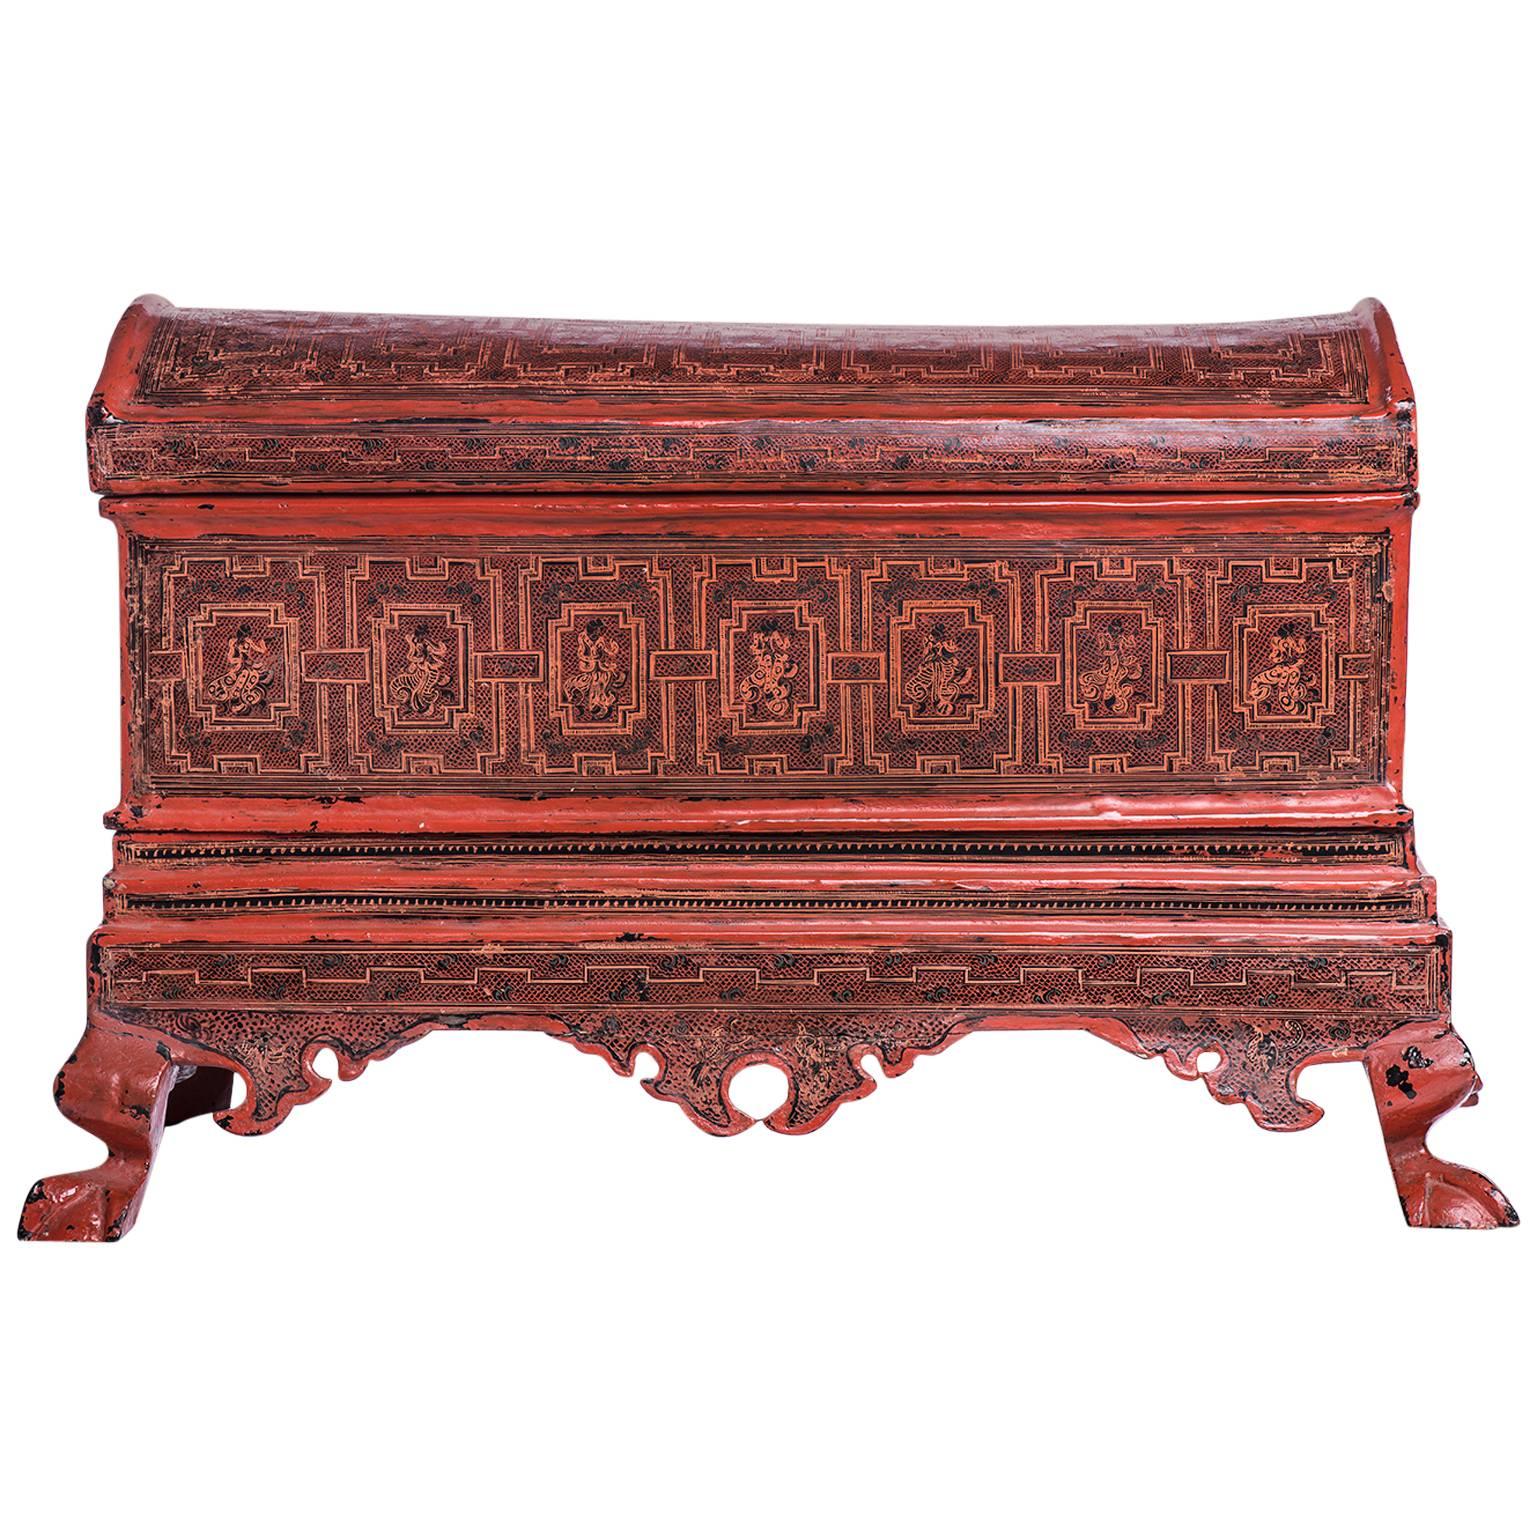 Burmese  Lacquered and Engraved Wooden Box